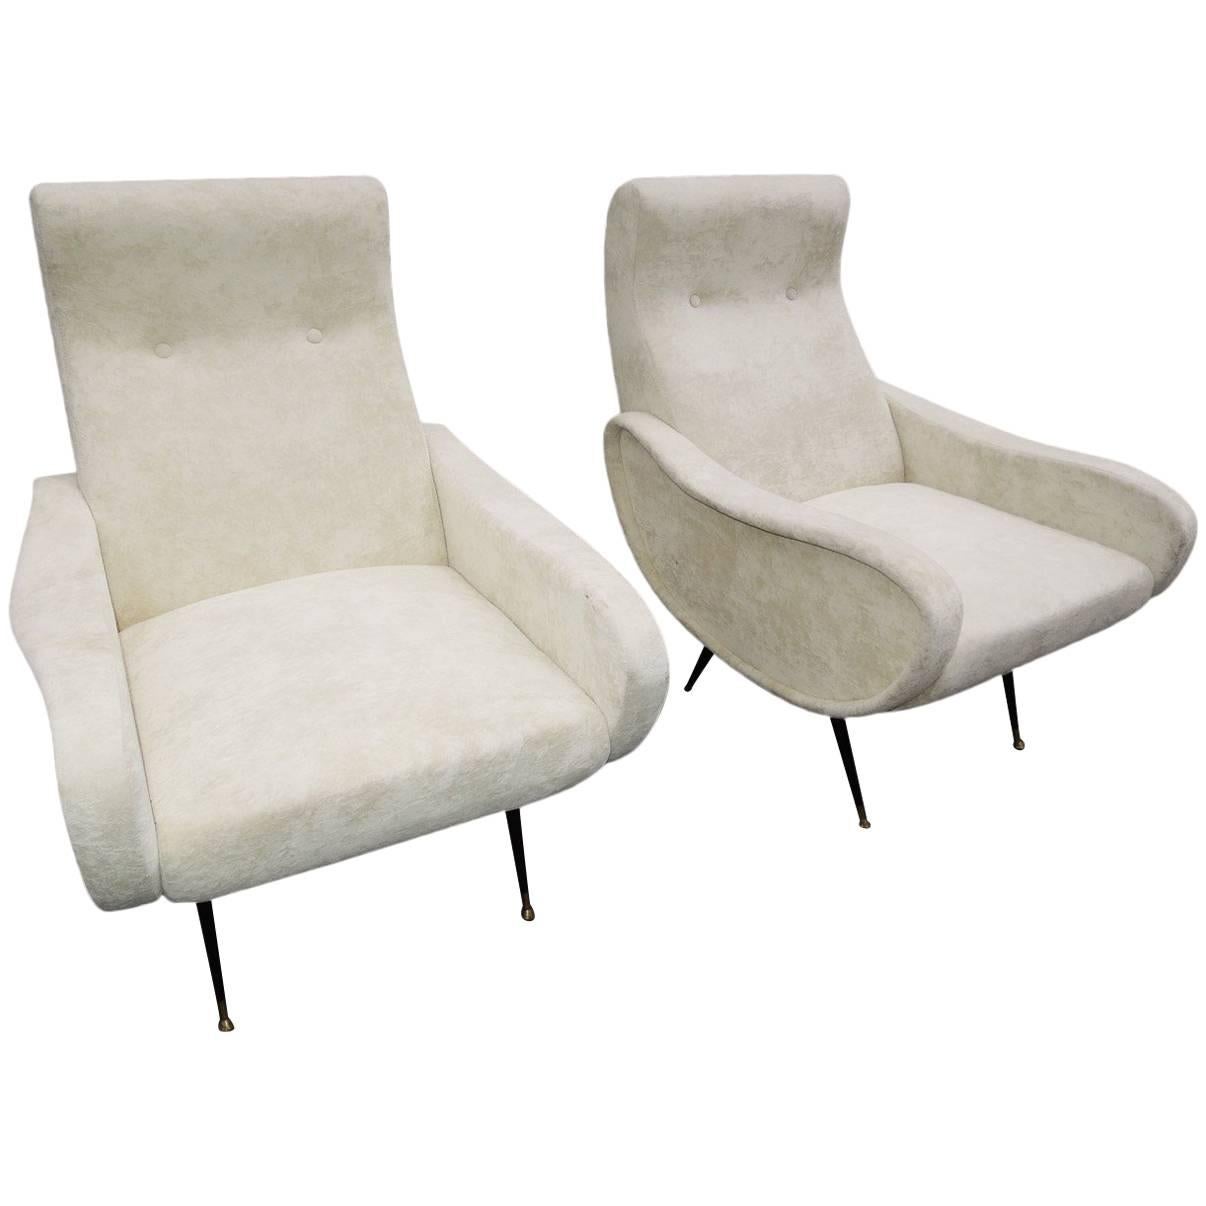 Pair of Cloud Lounge Chairs Marco Zanuso Style